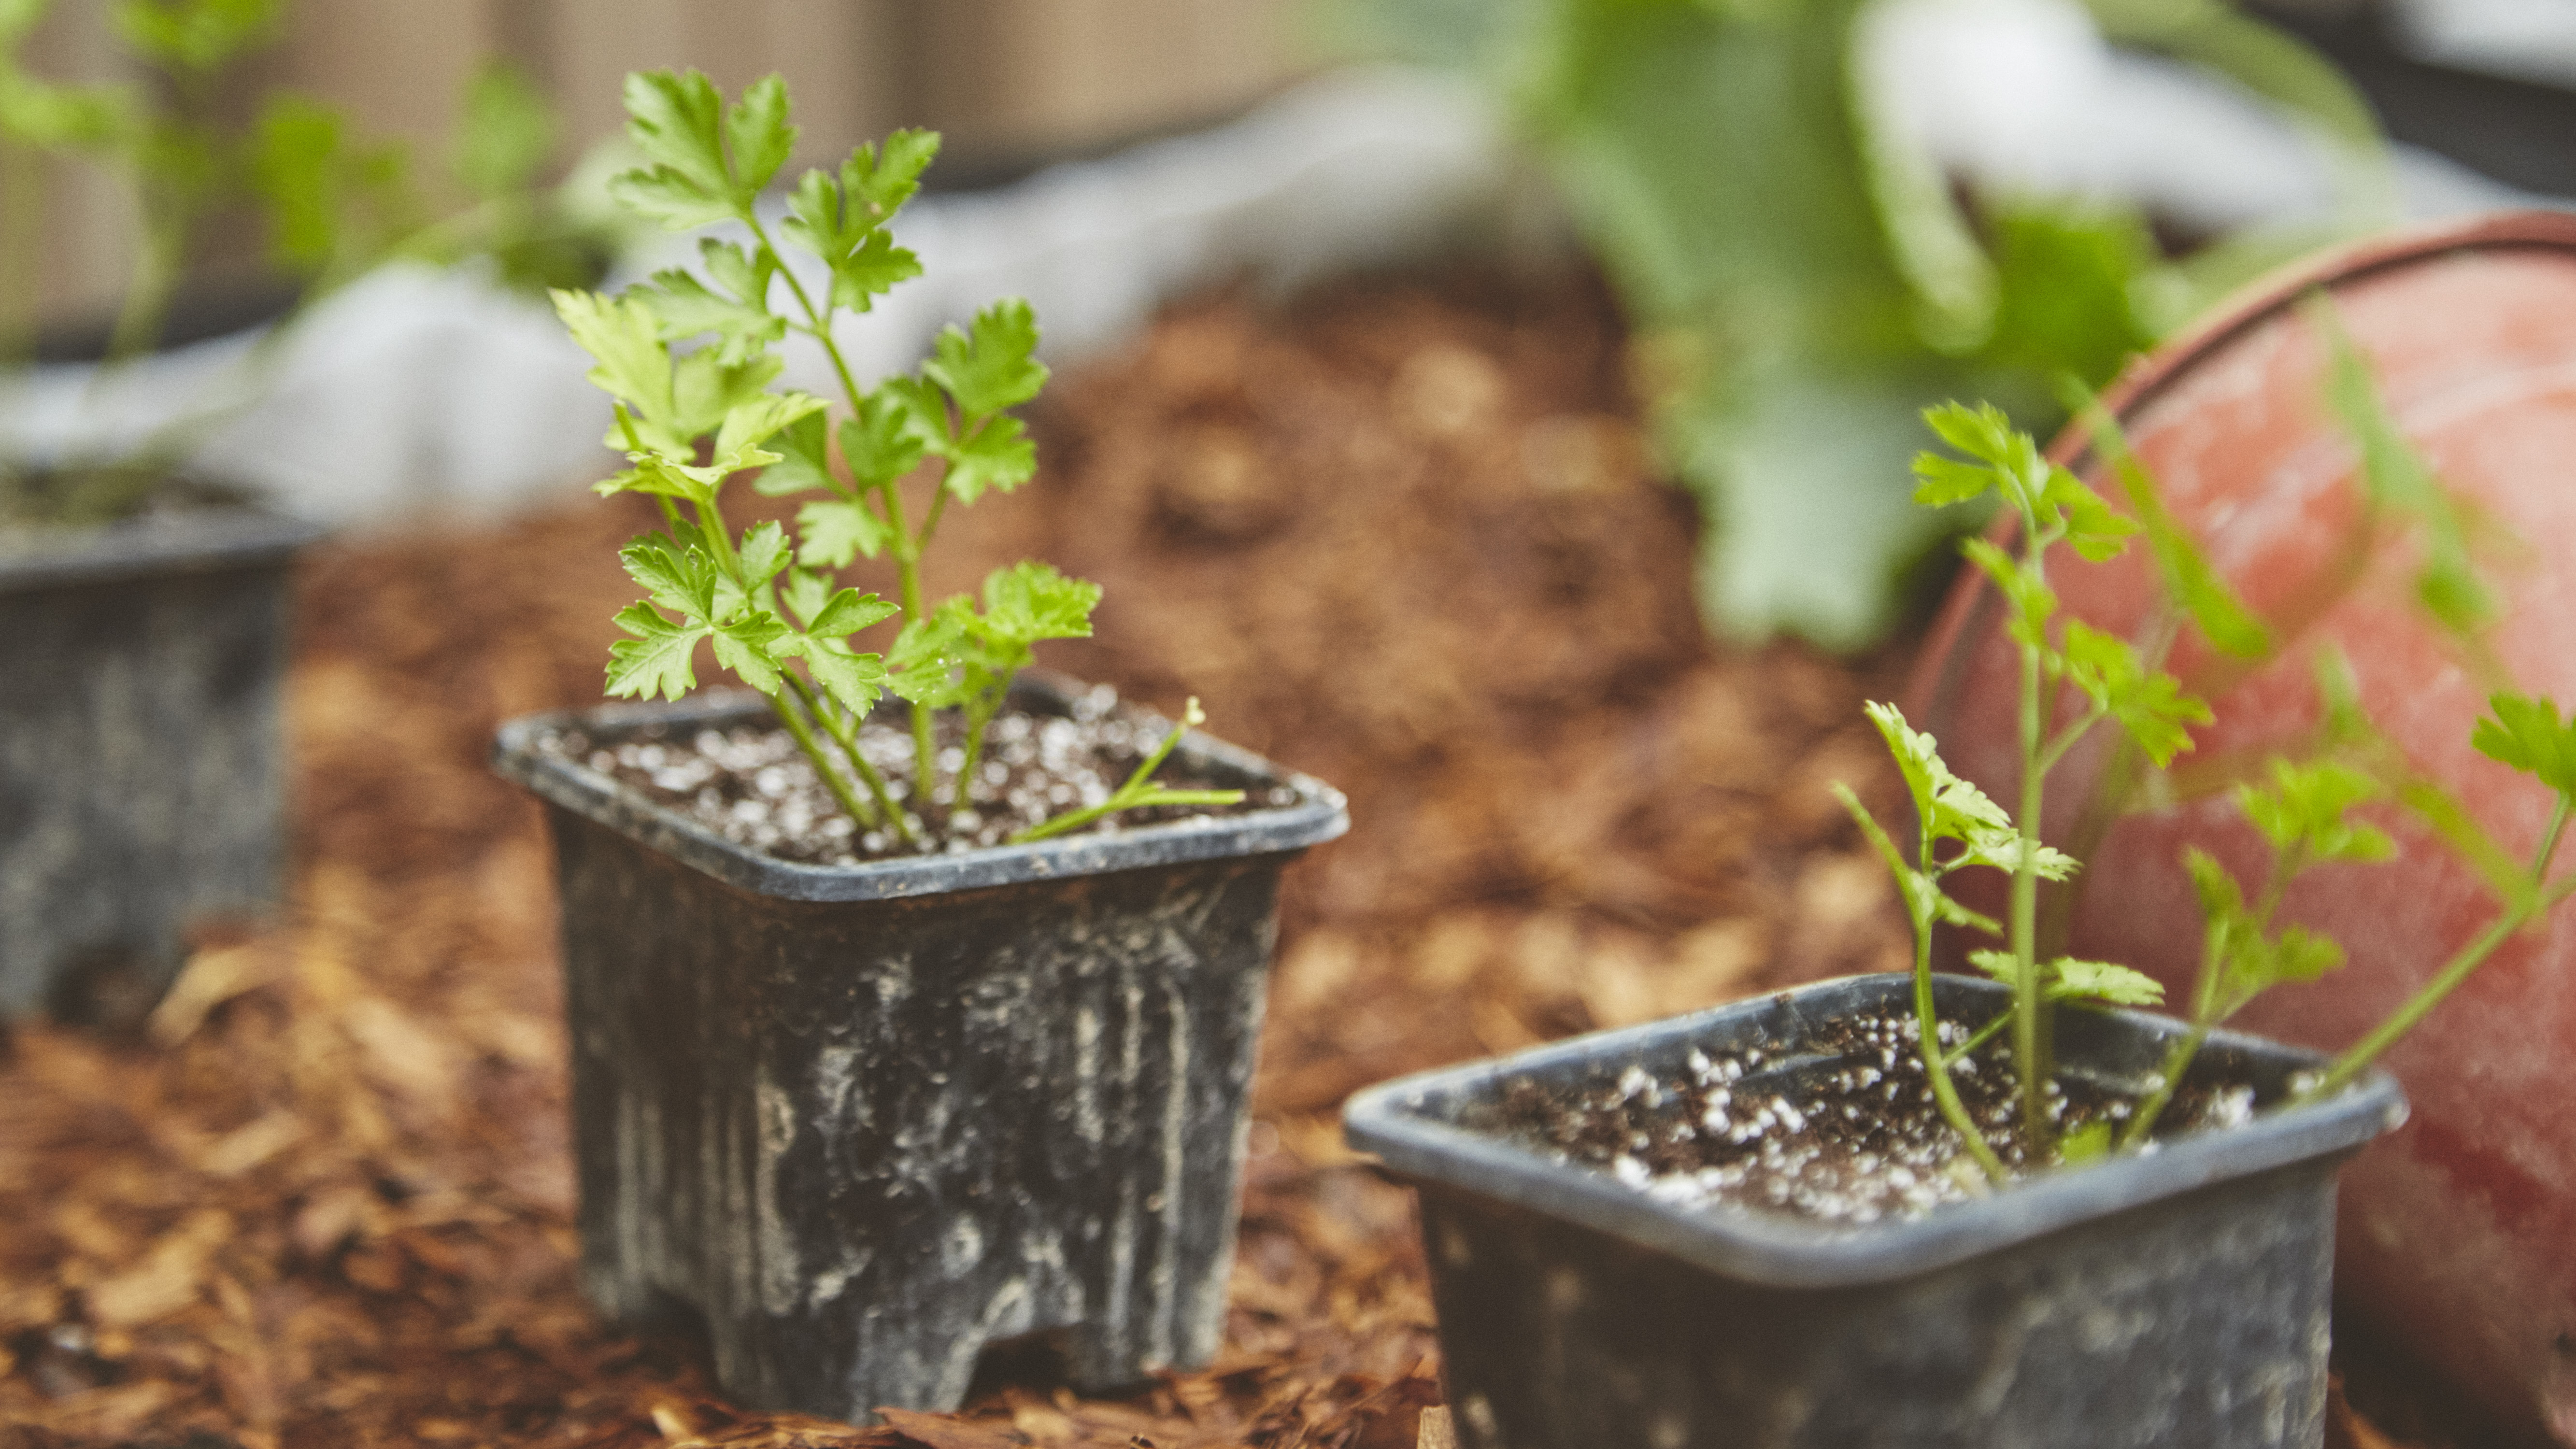 Learn how to grow and take care of your own plants at the Garage Greens garden